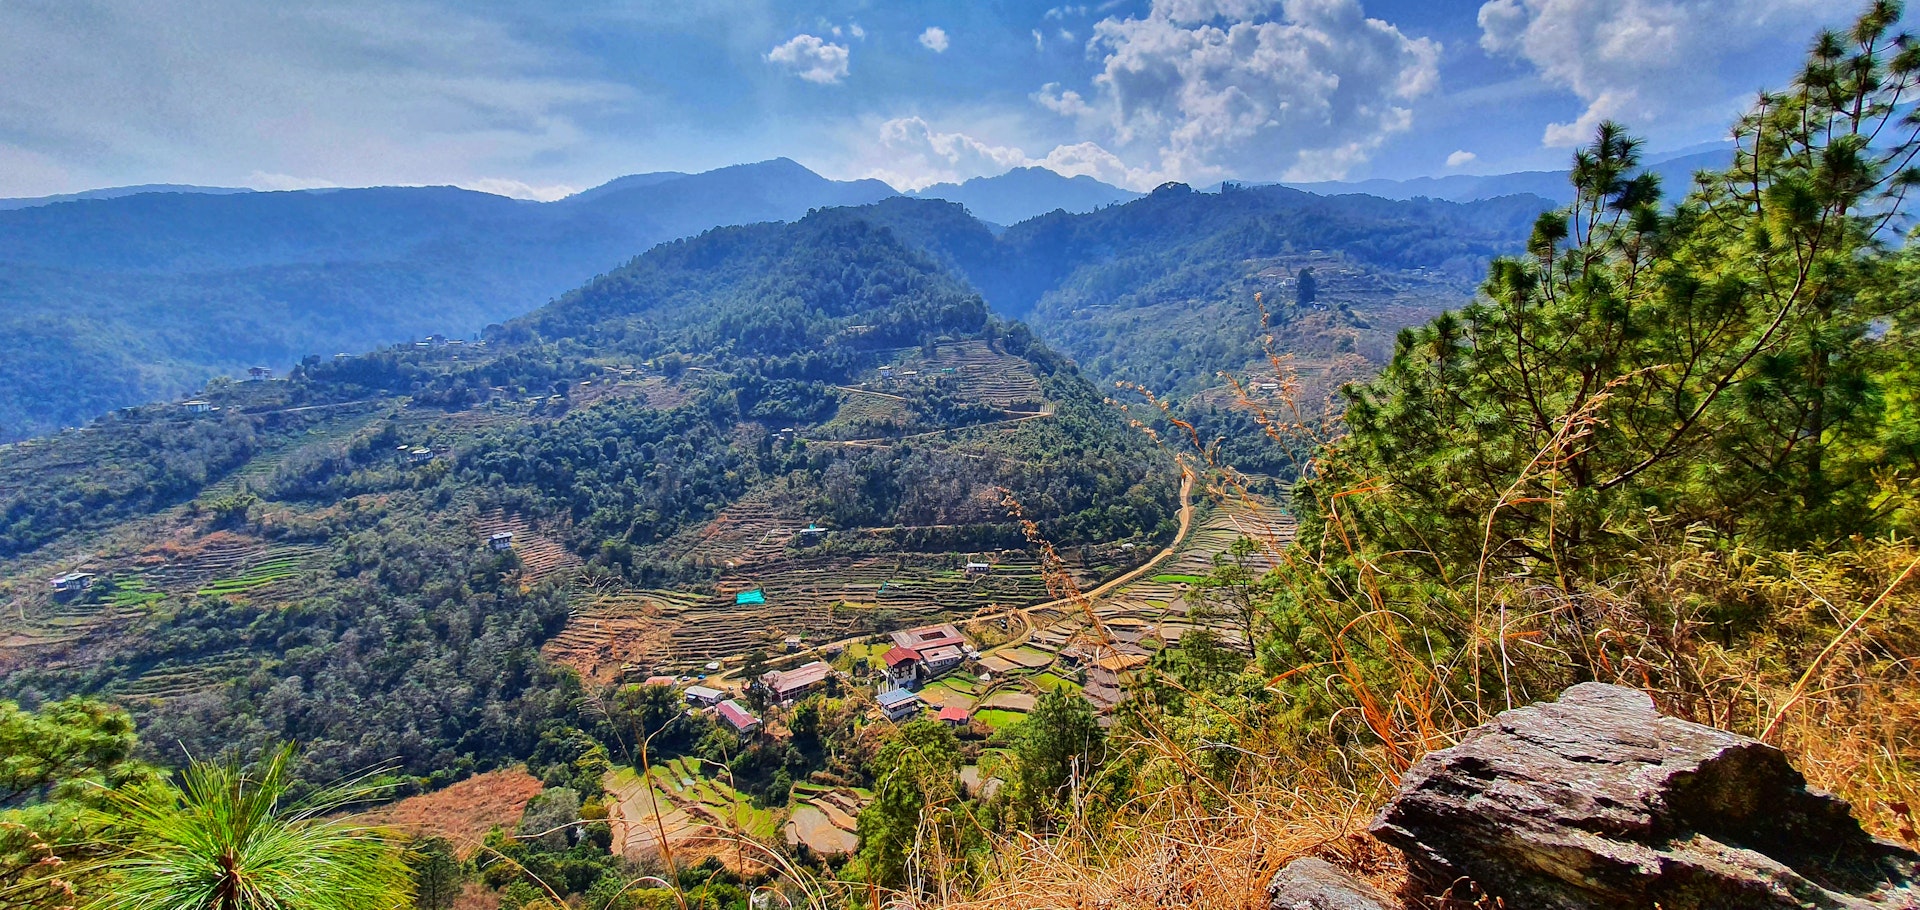 The stunning, sweeping vistas along the ancient Trans Bhutan Trail